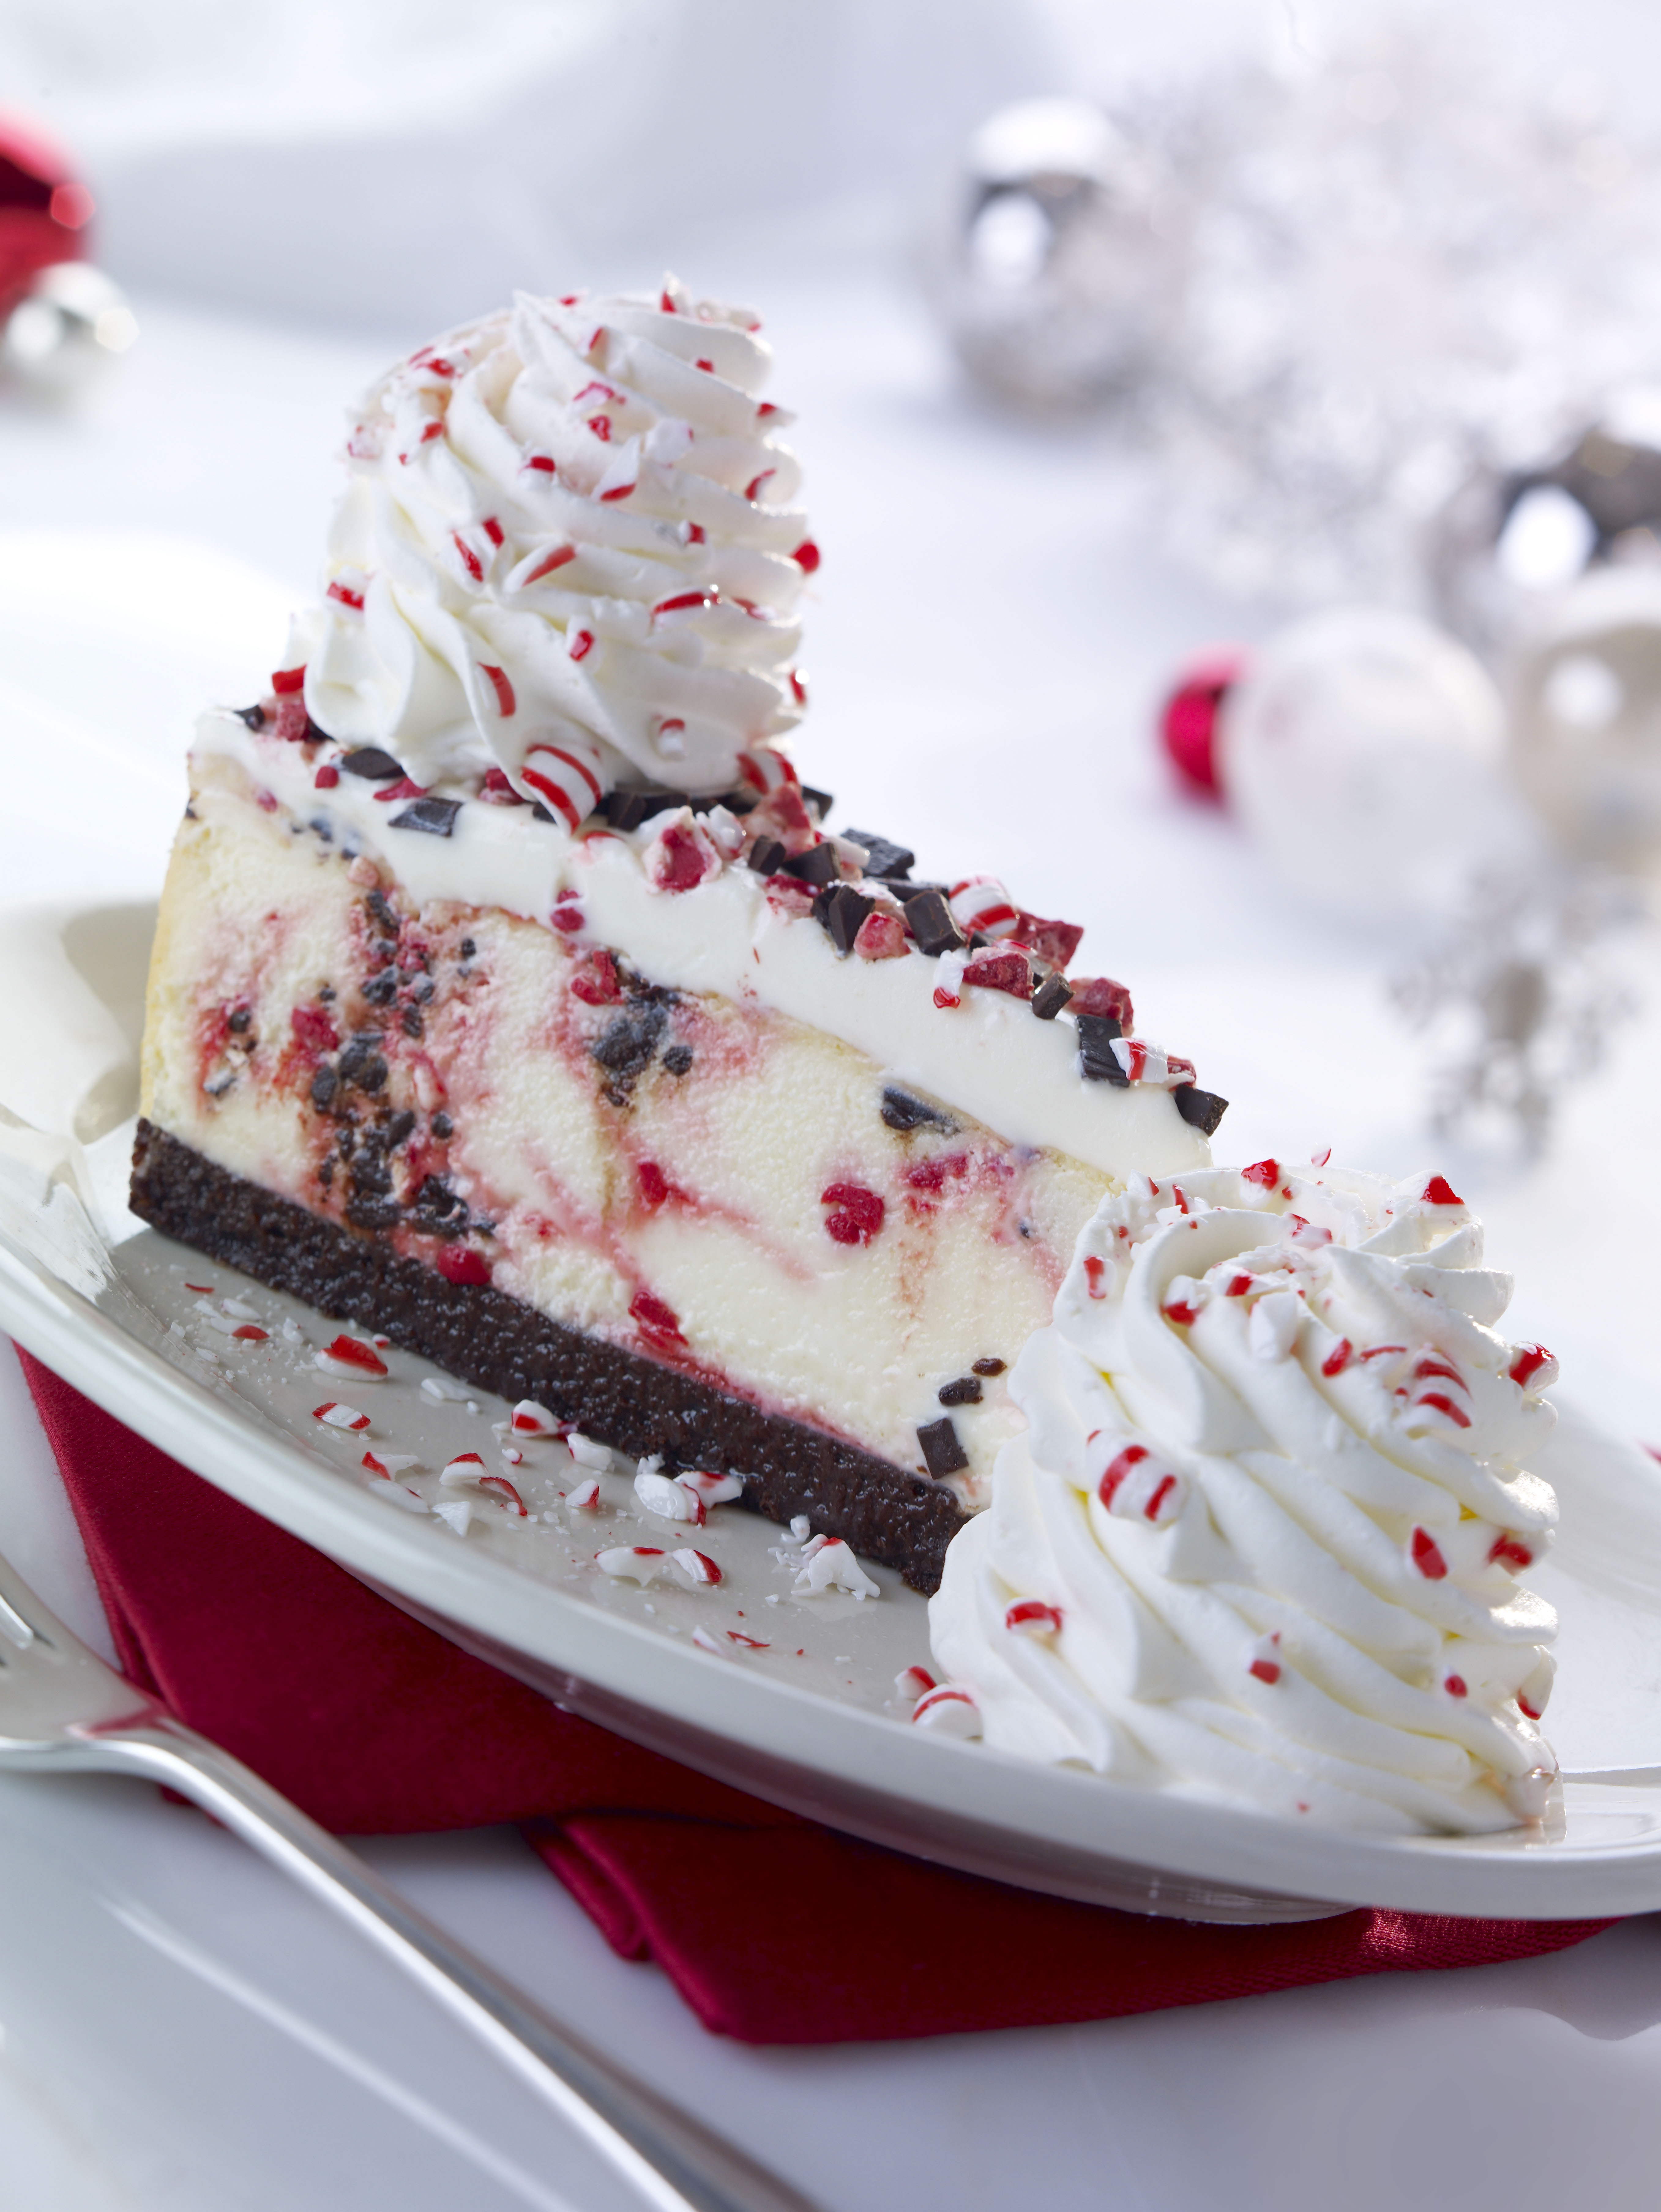 The Cheesecake Factory S Peppermint Bark Cheesecake And Slice Of Joy Gift Card Offer Are Back For The Holiday Season Business Wire